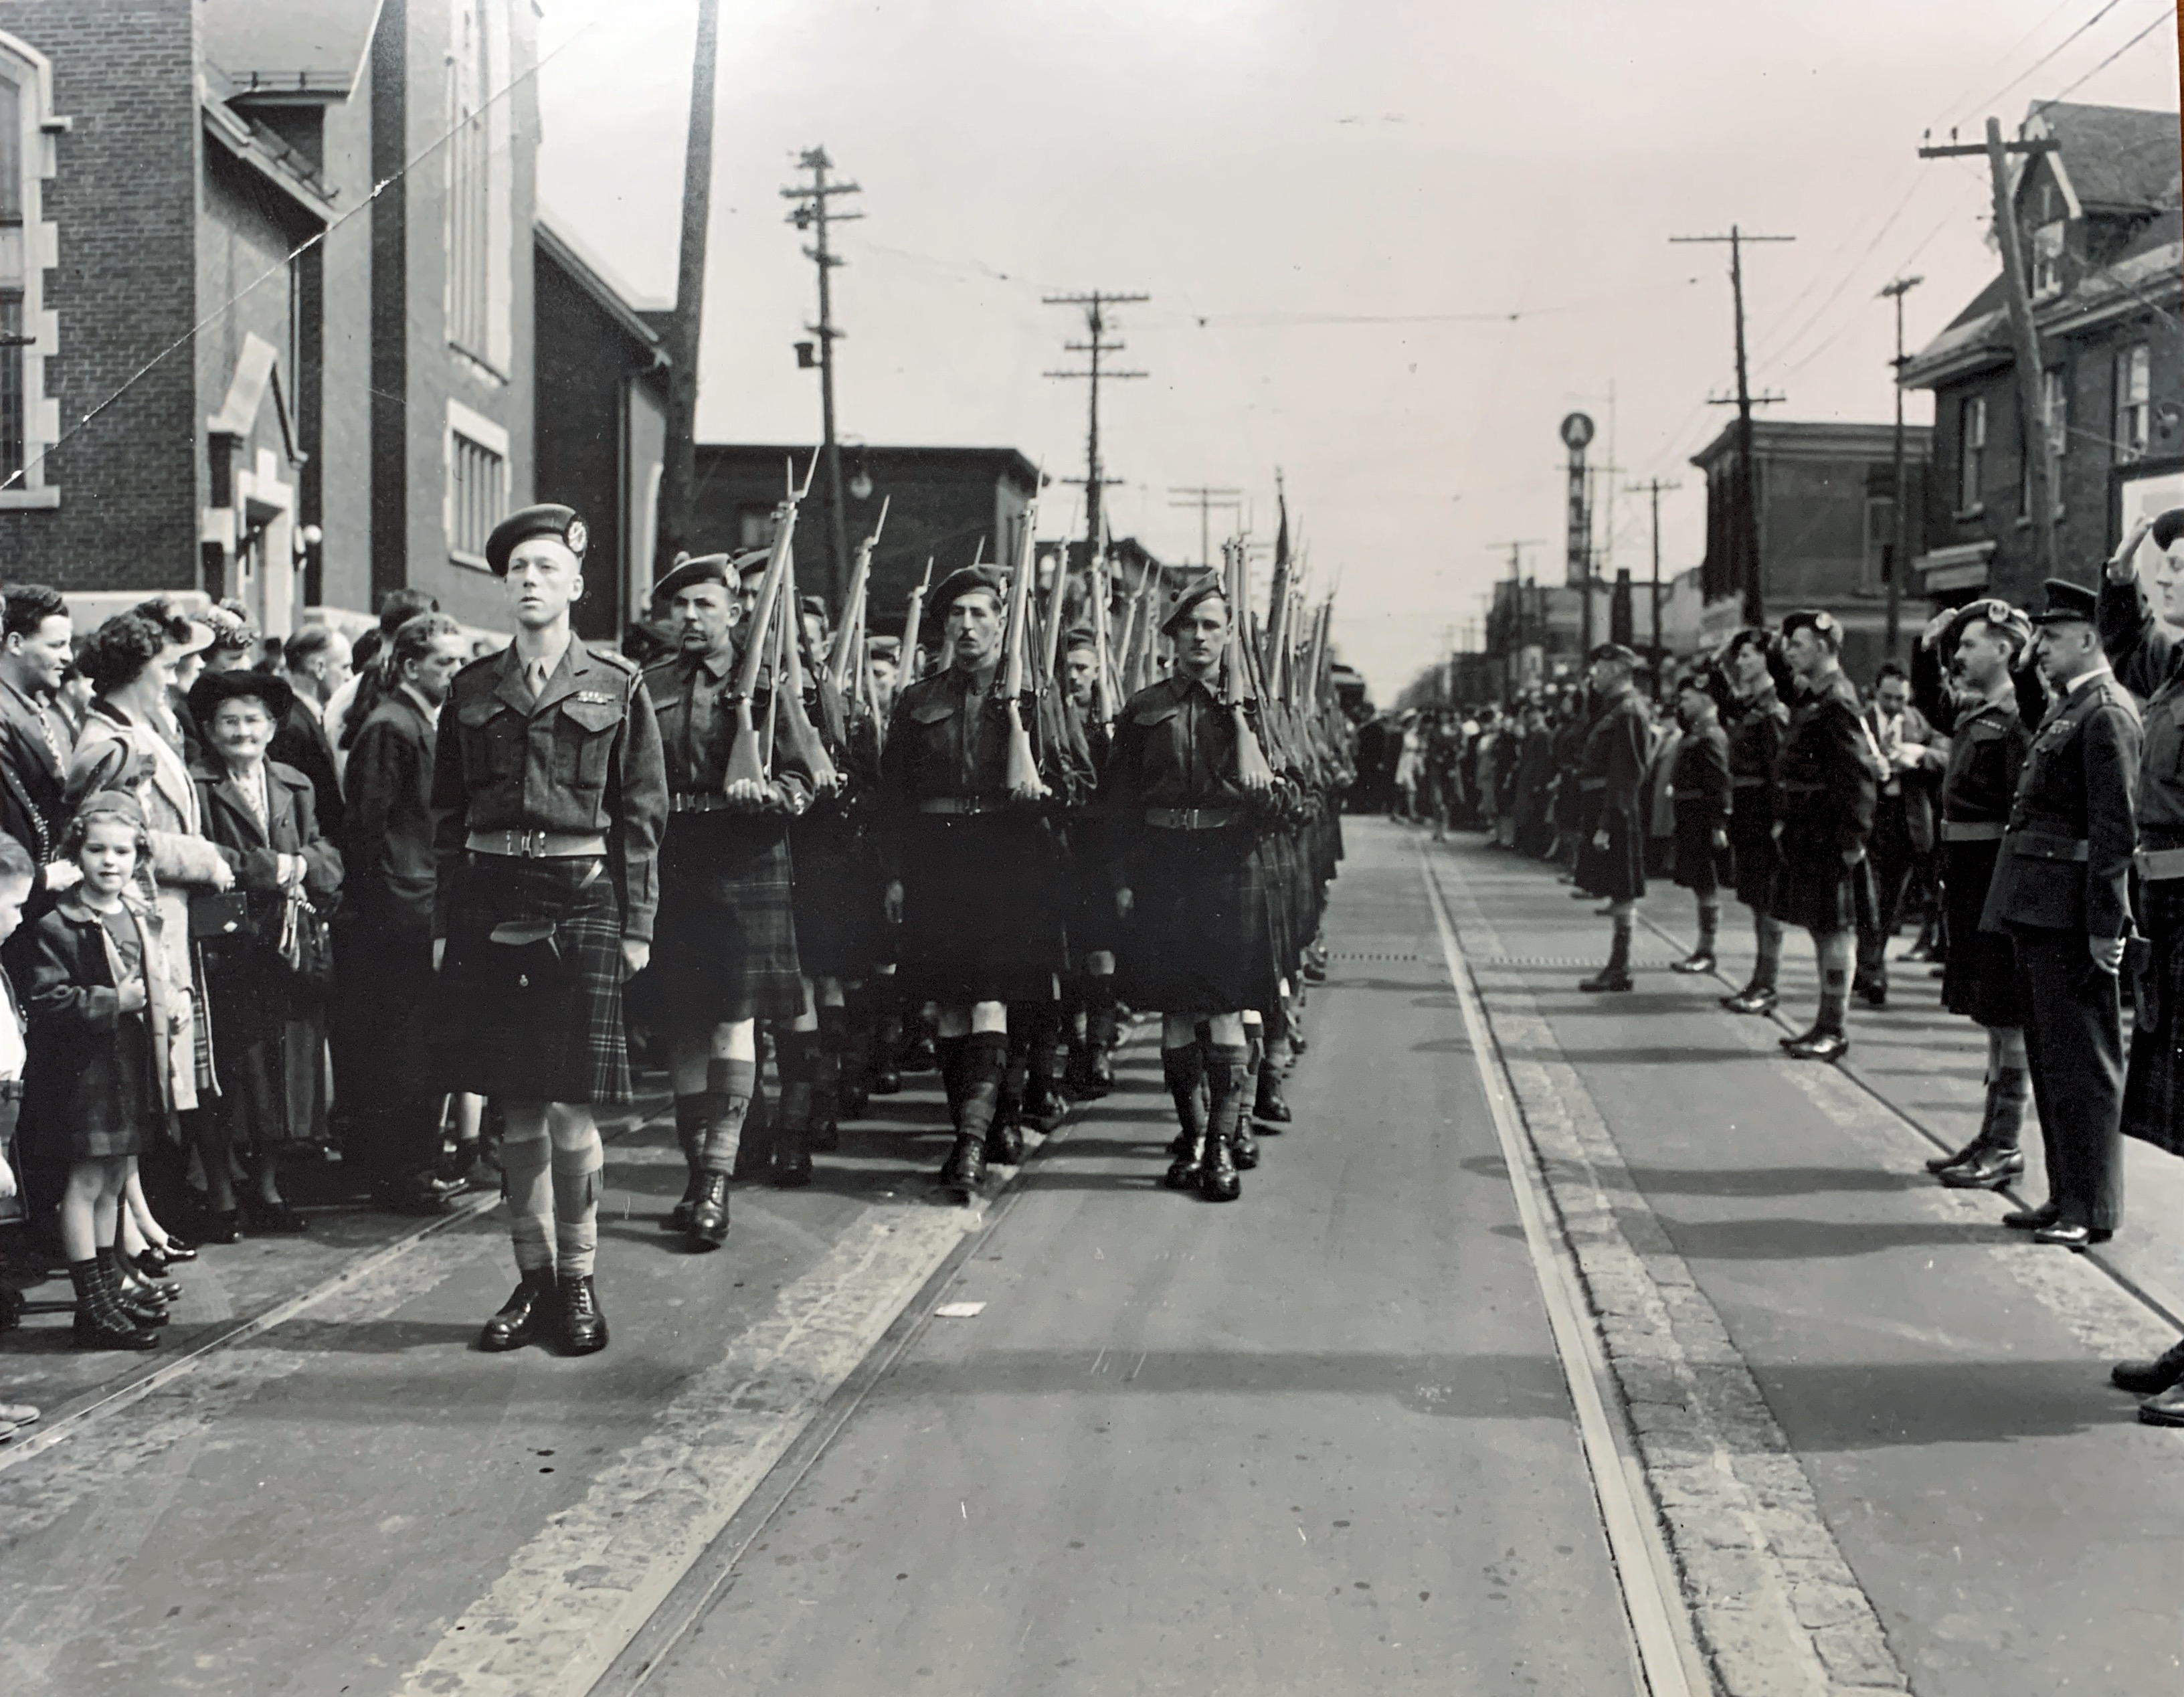 May 1940
Cameron Highlanders marching down Bank Street after having deposited the King’s and Regimental Colours for safekeeping at St Giles. 